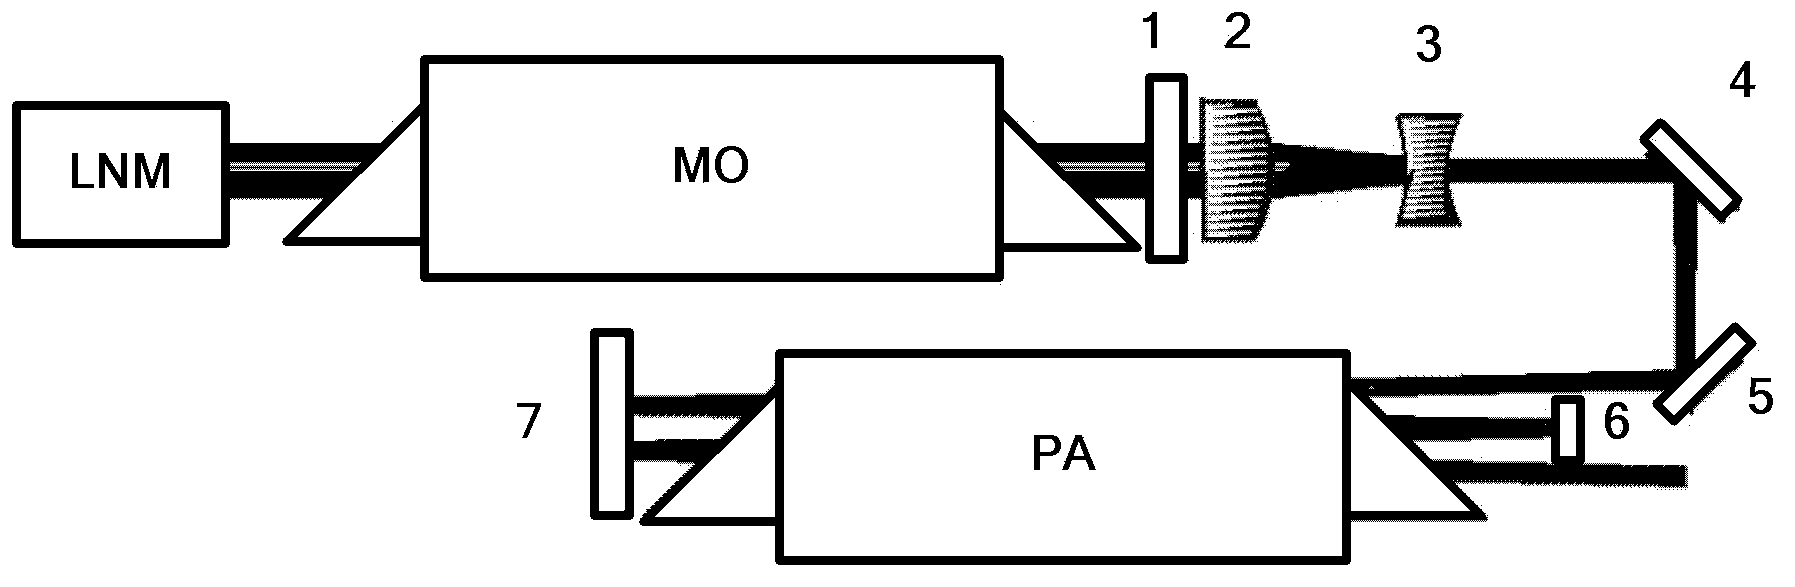 Gas laser amplifying system with MOPA structure